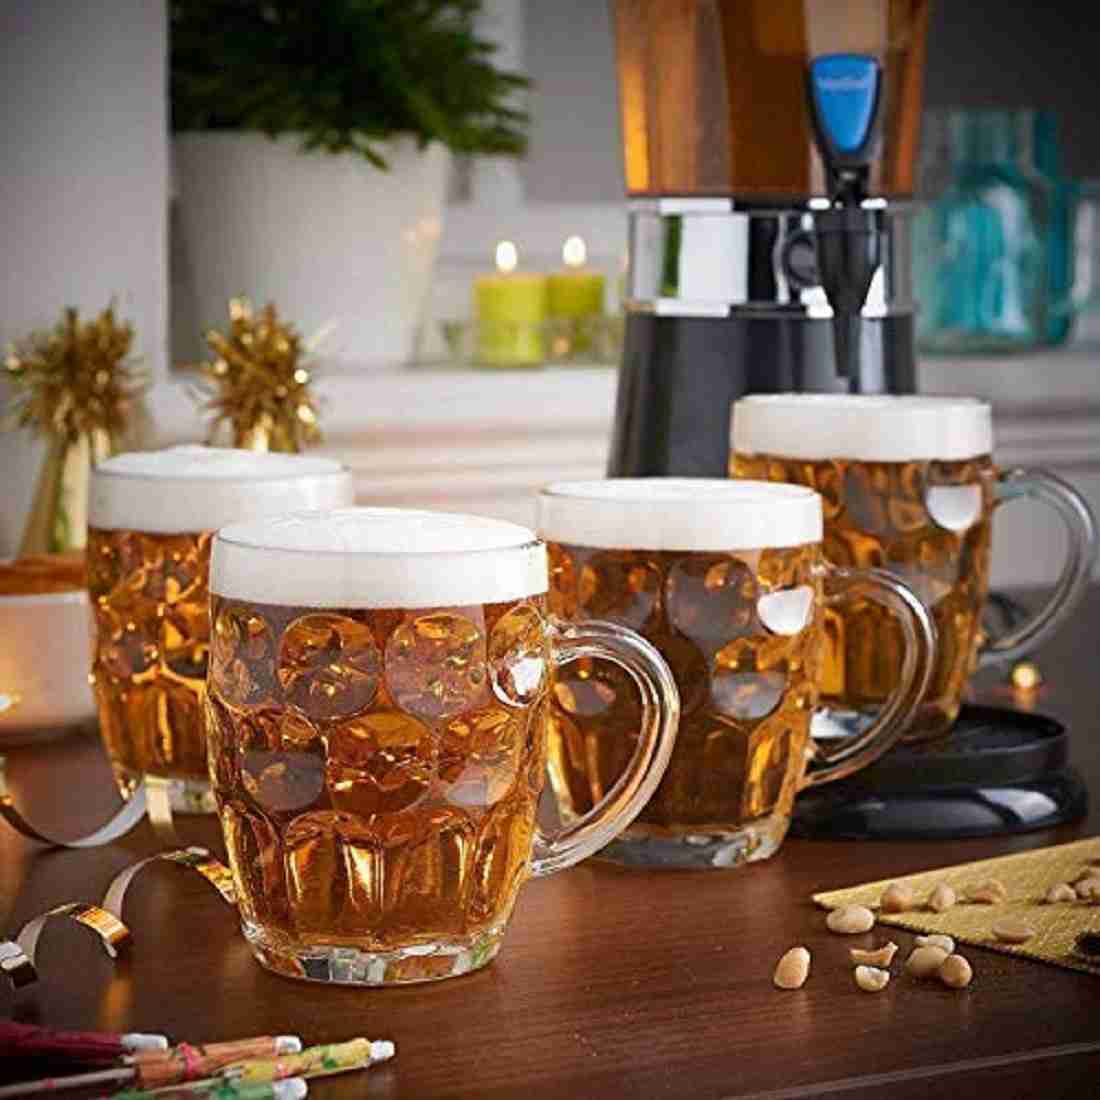 K AND D BROTHERS (Pack of 2) Beer Mug Transparent, Heavy Base